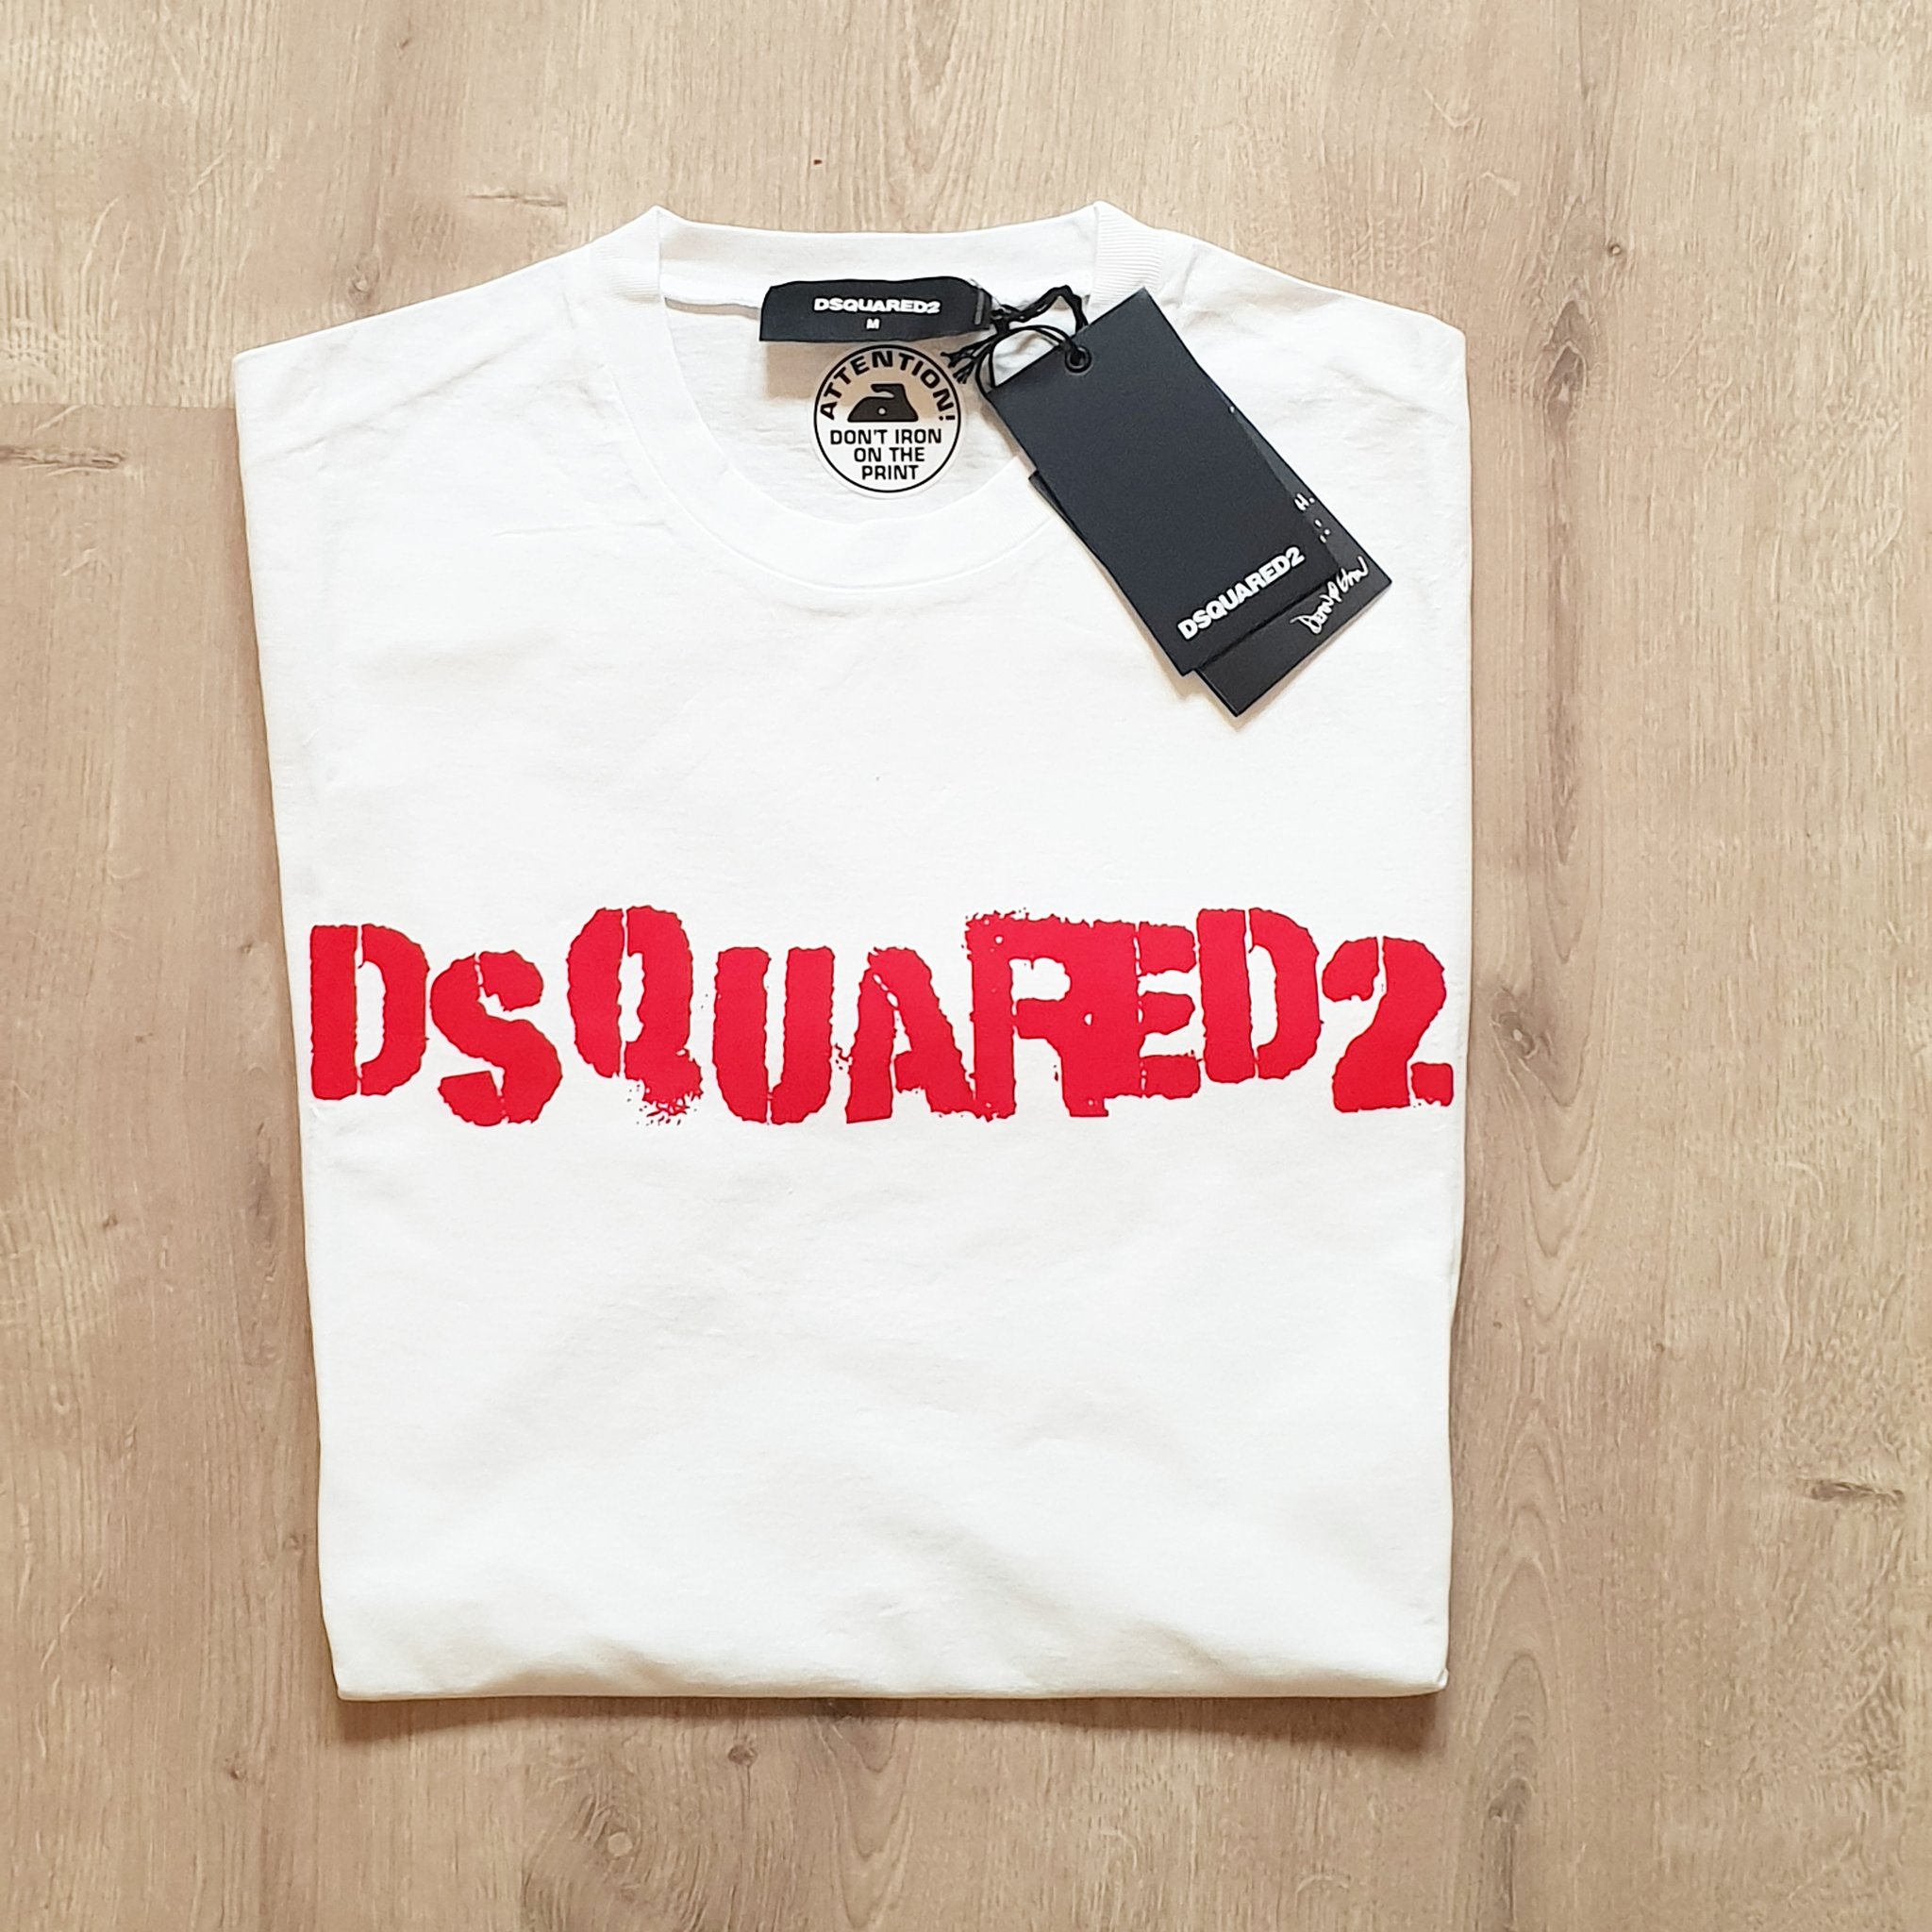 belasting doorgaan Geleerde Klay Uk on Twitter: "Dsquared2 T Shirts 💦 ➖ Small to XXL Available 💥 RRP  £180, Our Price £115 Fit small, next size up recommended 🚫 💷 Slice it  into 3 payments